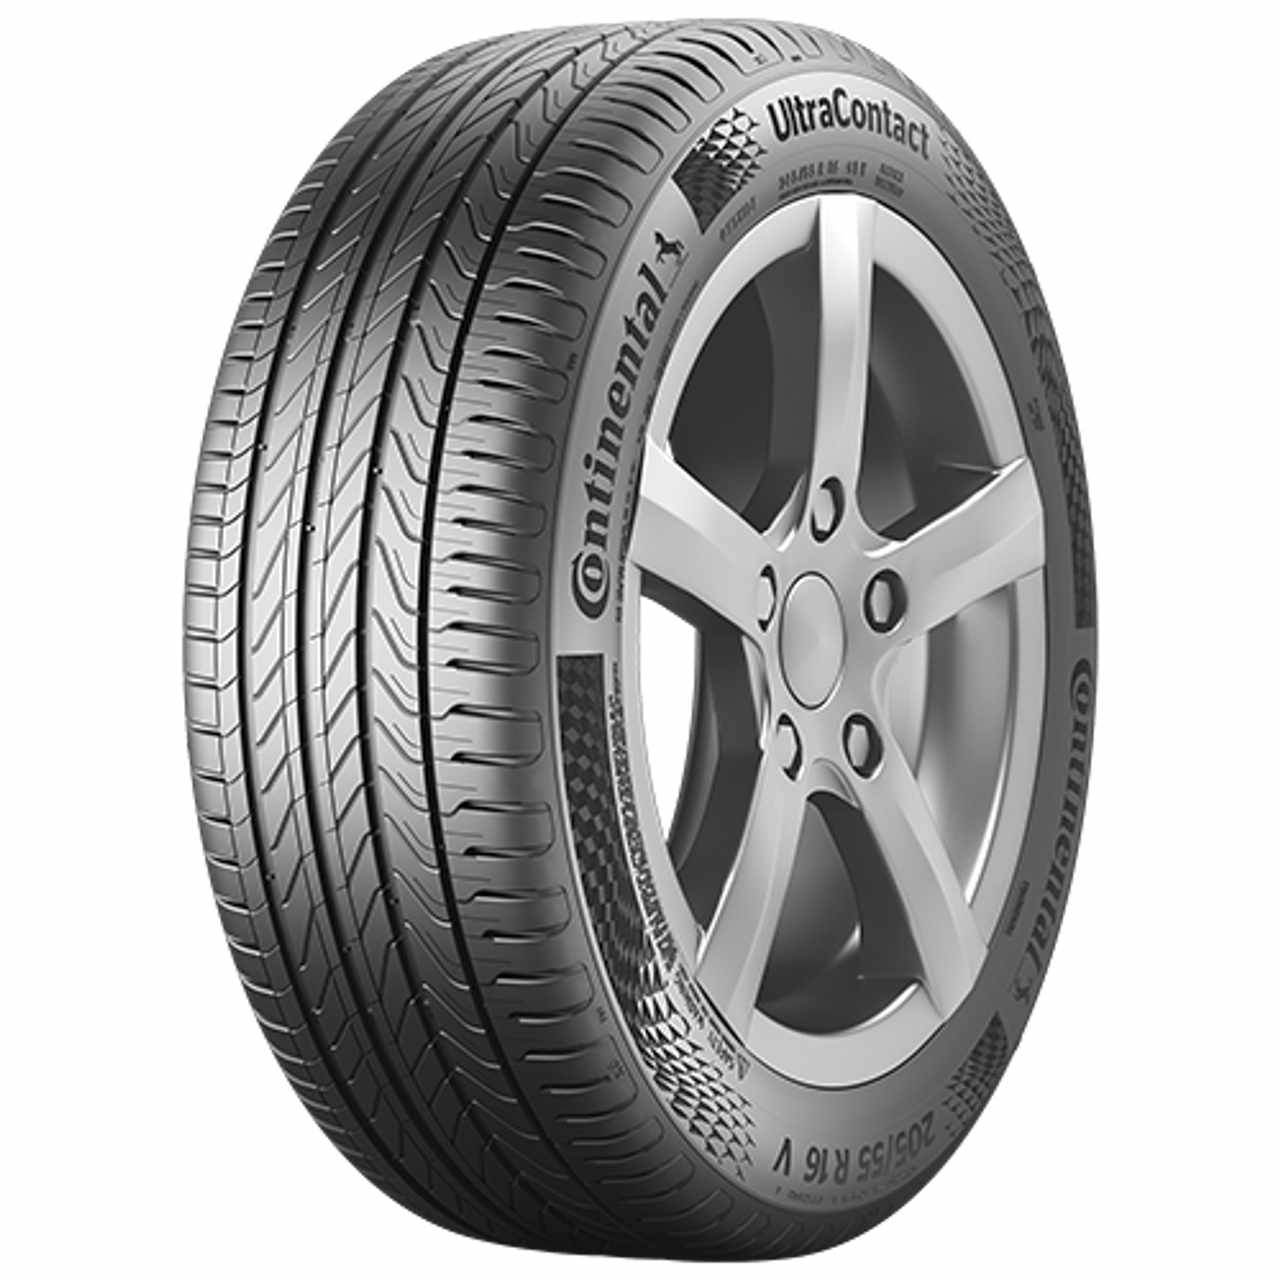 CONTINENTAL ULTRACONTACT (EVc) 205/60R16 92H FR BSW